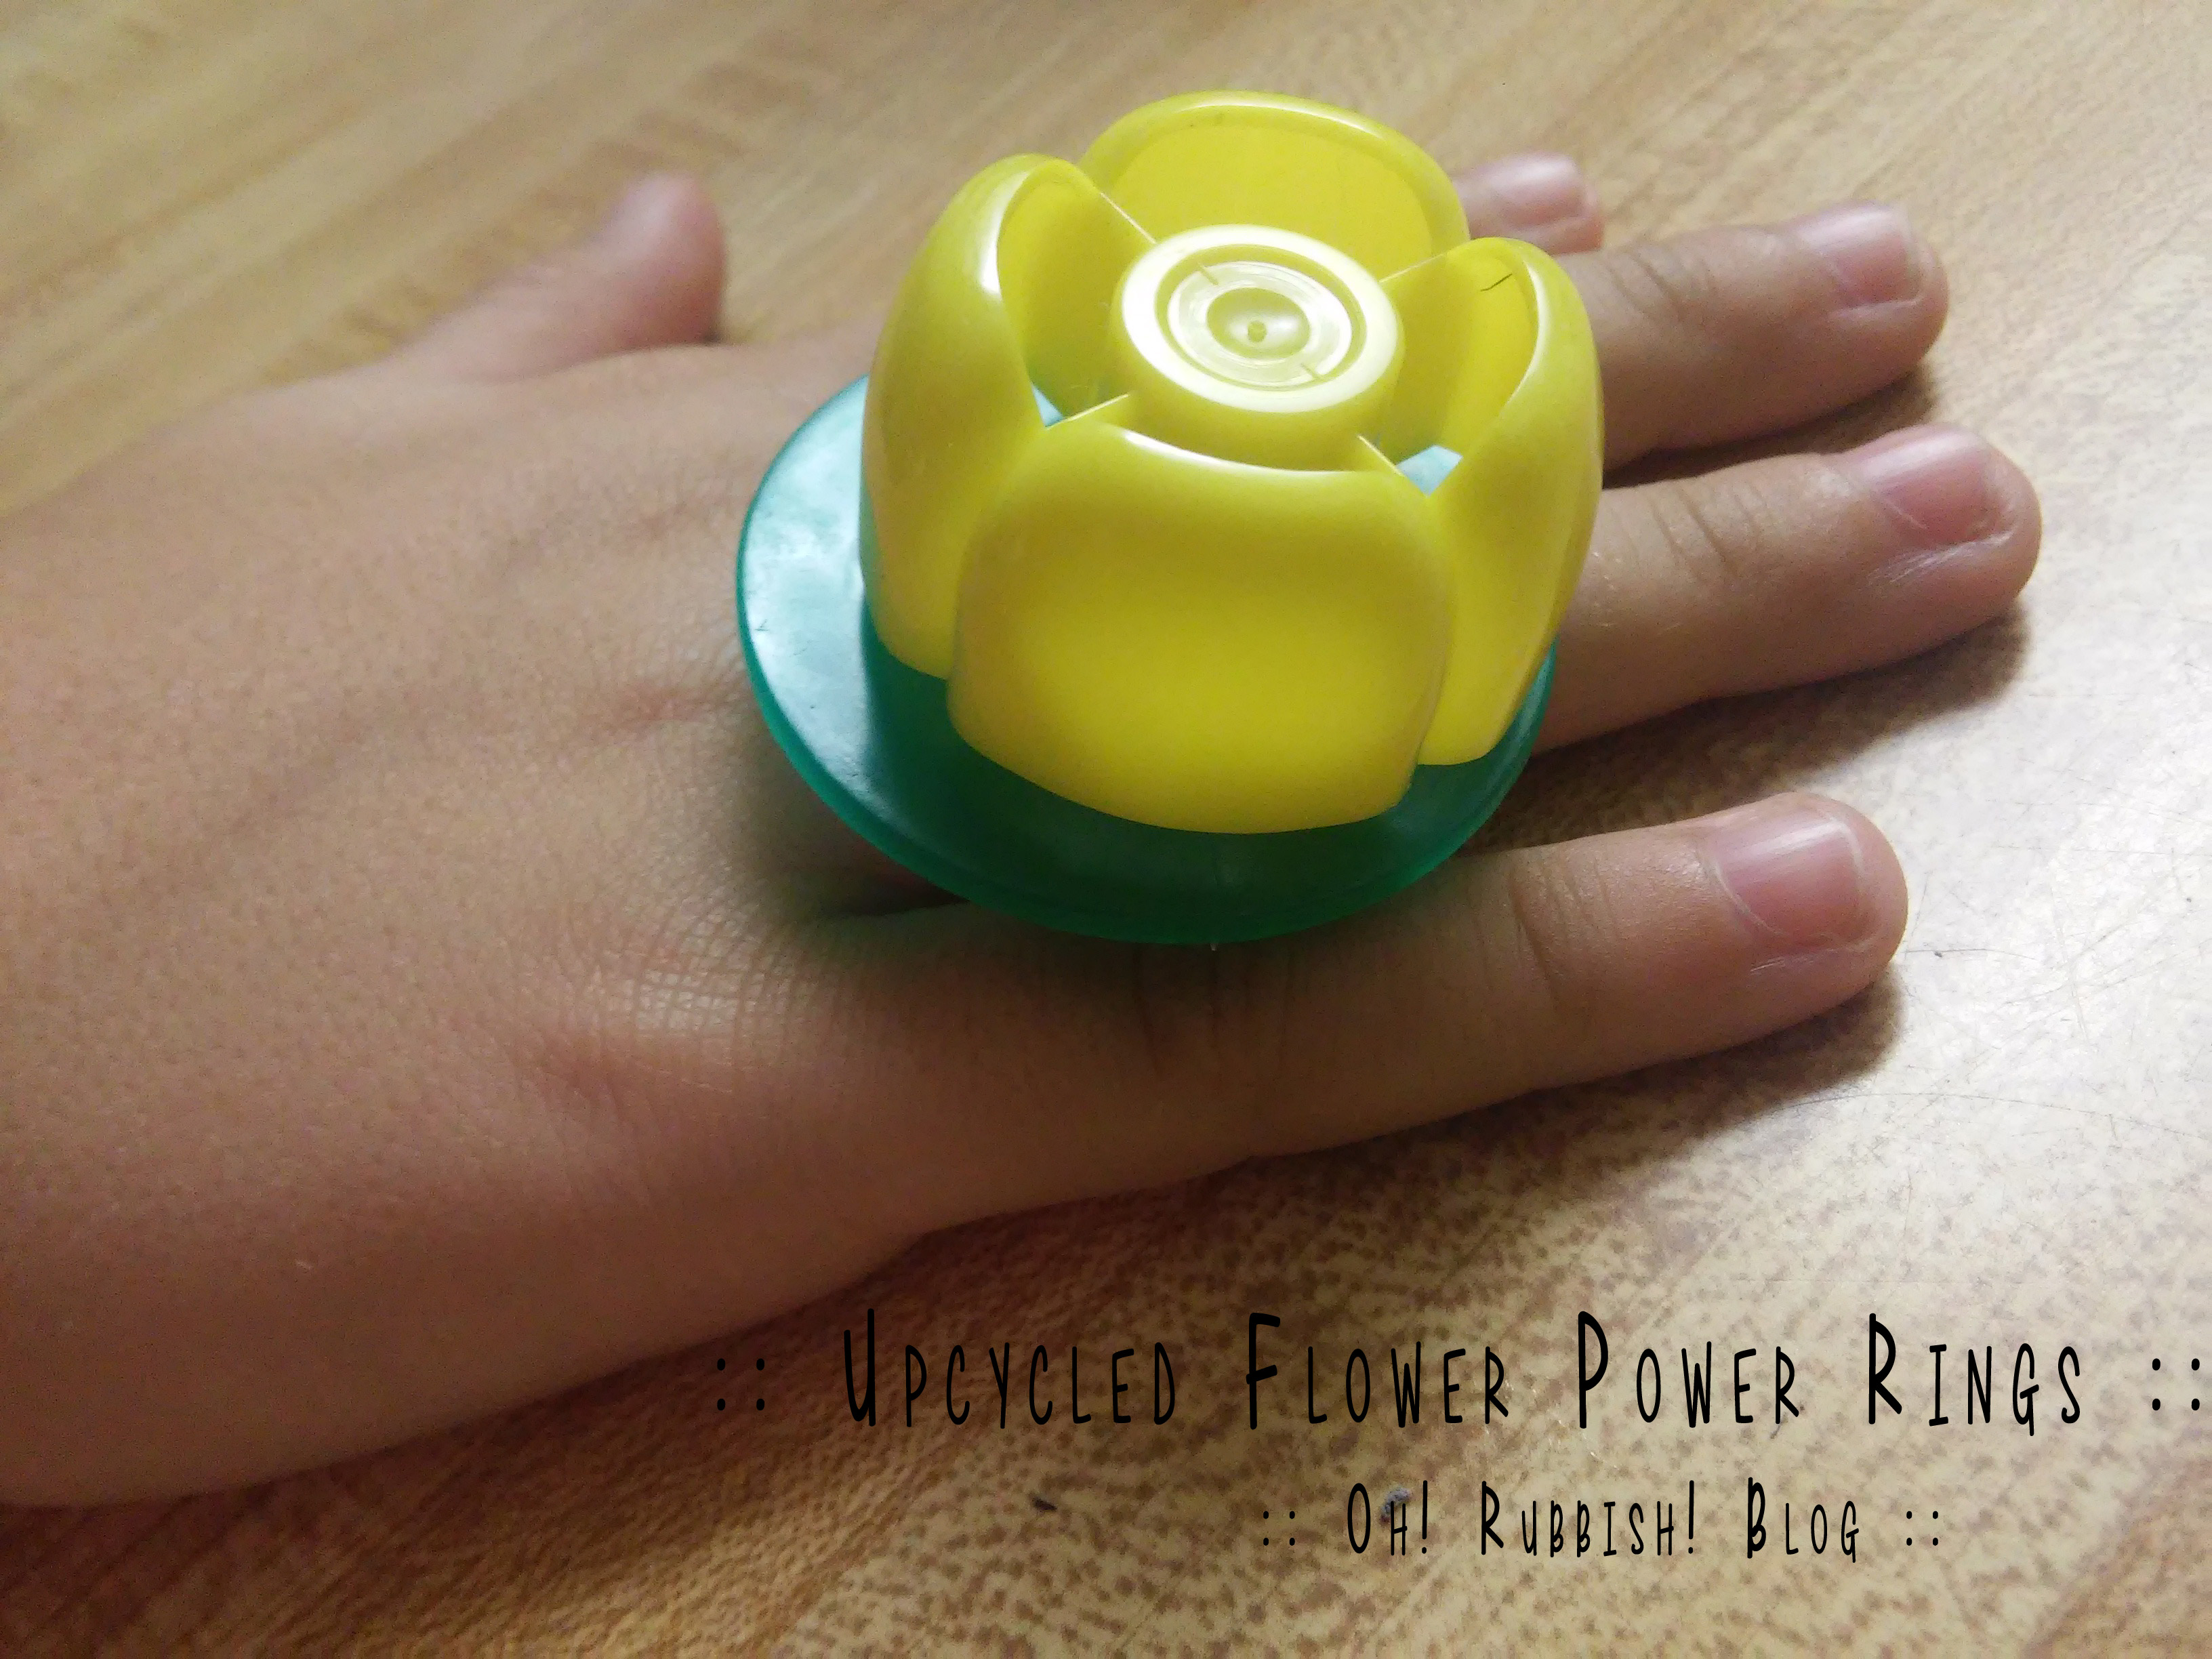 Upcycled Flower Power Rings by oh! rubbish! blog